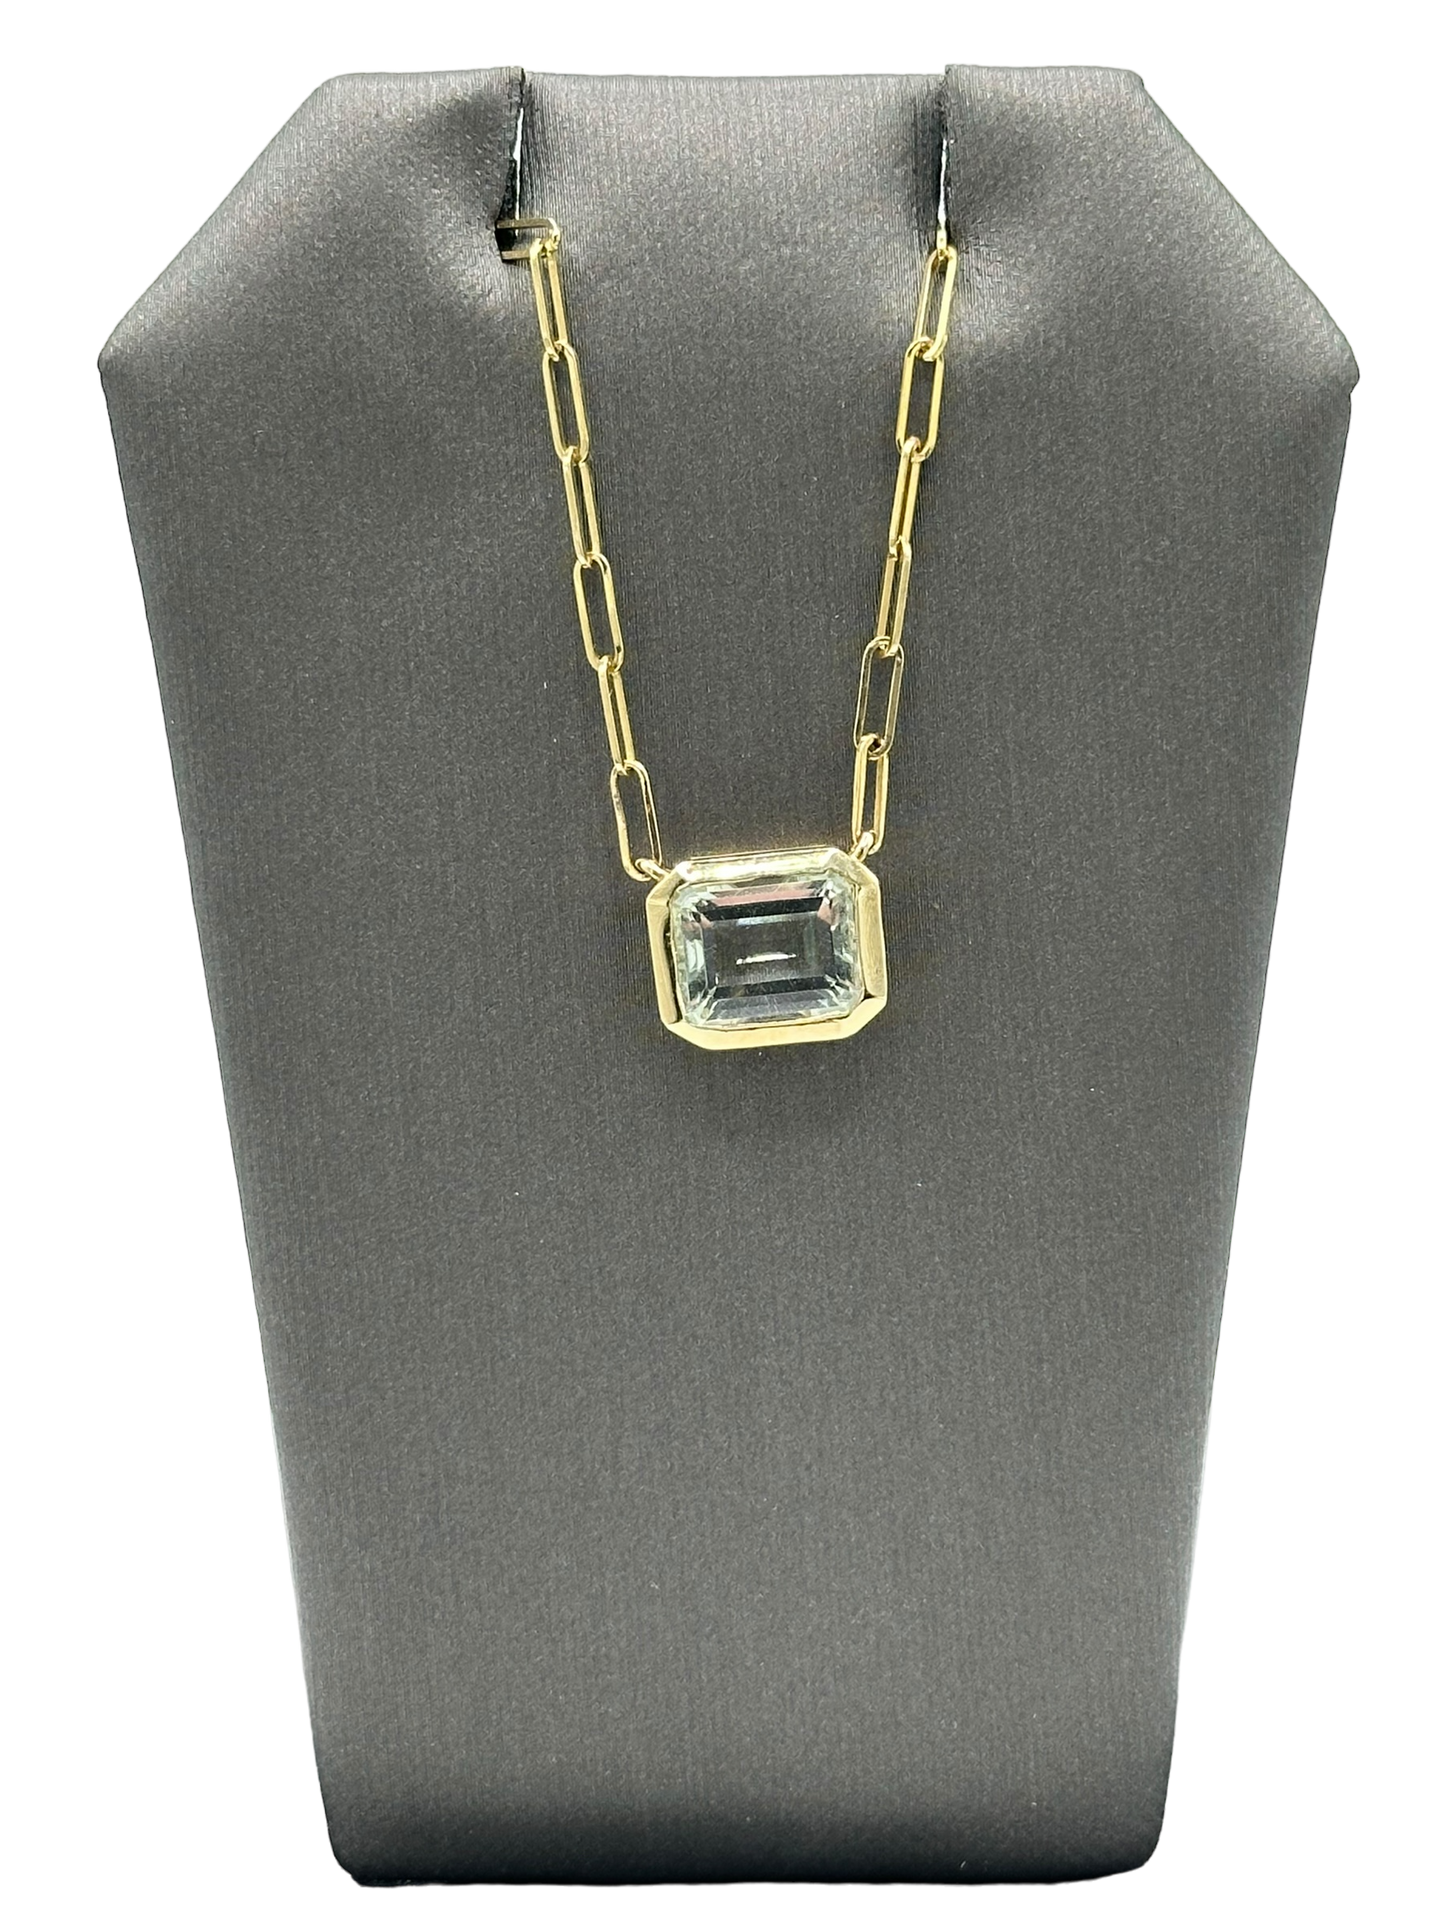 Emerald Cut Green Amethyst Pendant on Paperclip Chain